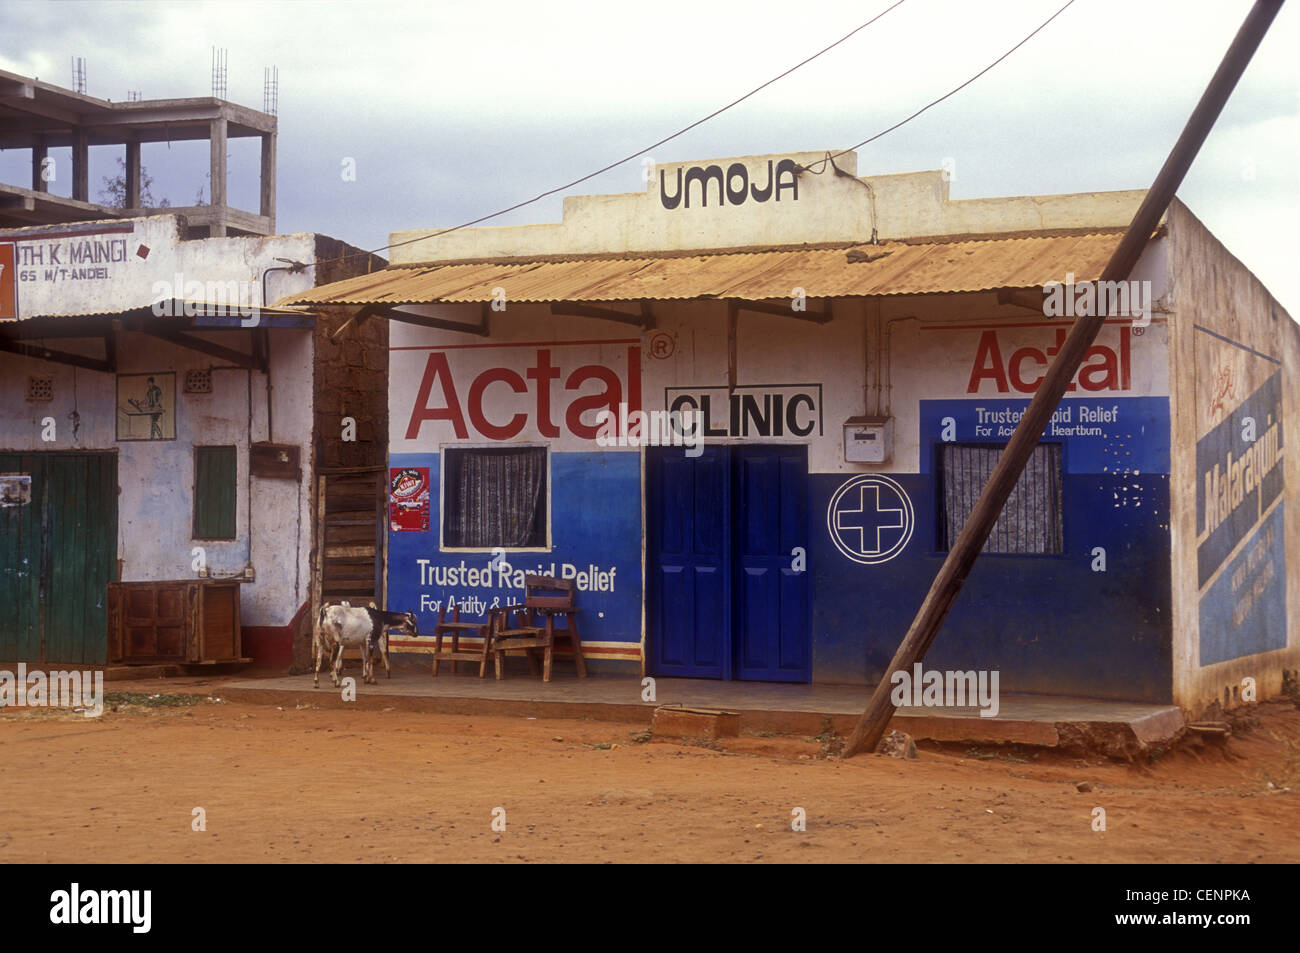 Rural 'Third world' Umoja Health Clinic Mtito Andei Kenya Africa with advertisments for Actal and Malaraquin Goats on verandah Stock Photo